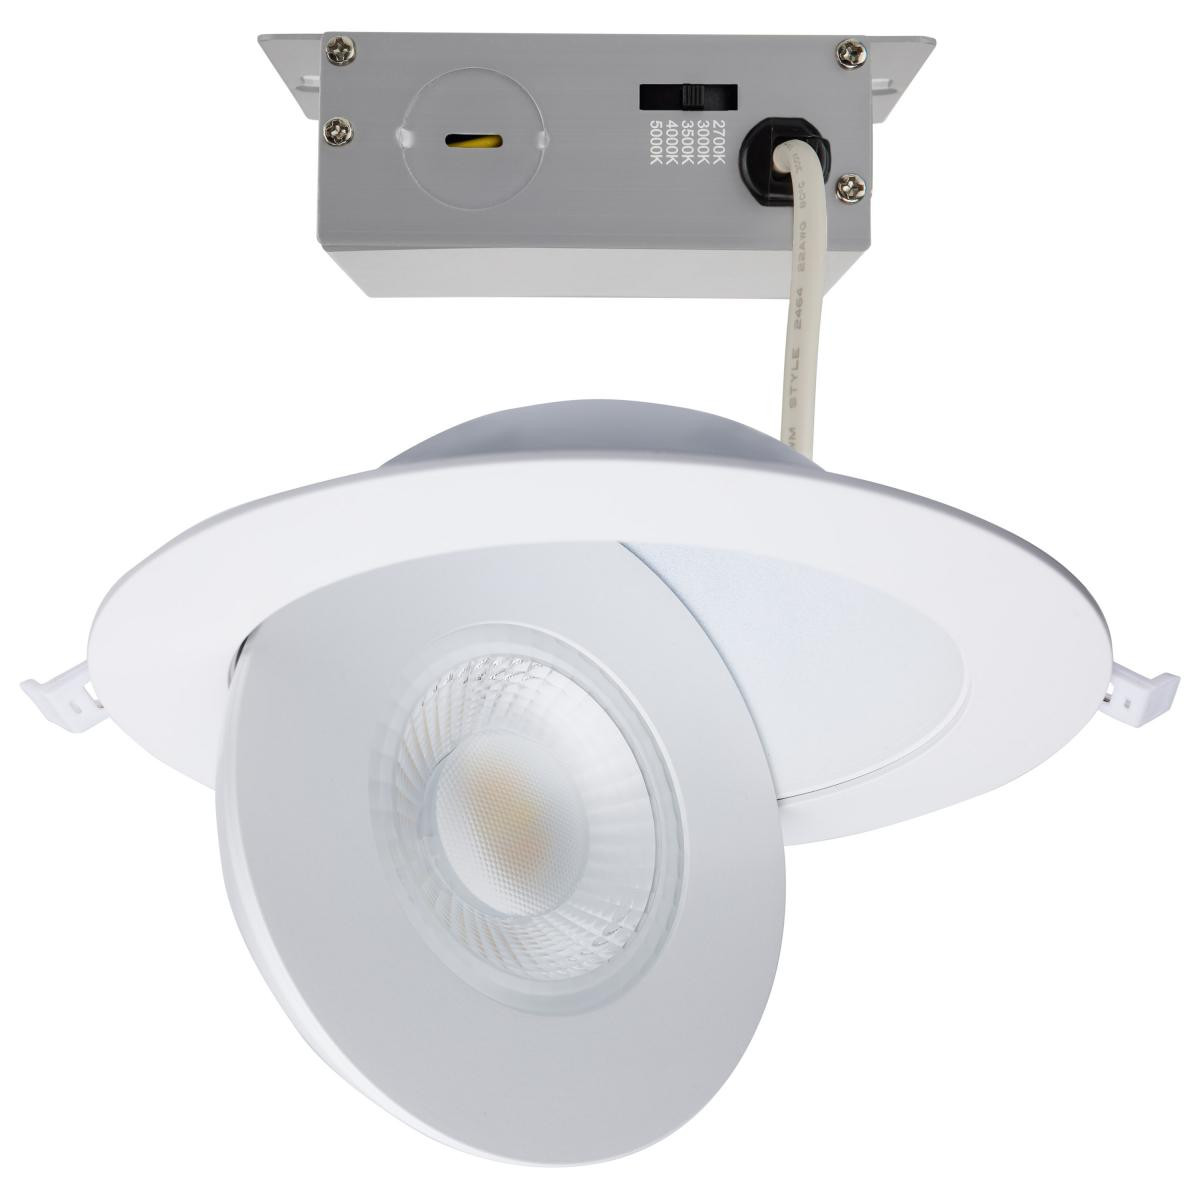 6 Inch Round LED Gimbaled Downlight - 15W - 1400 Lumens - 120V - Color Temperature Selectable 27K/30K/35K/40K/50K - White Finish - No Recess Can Required